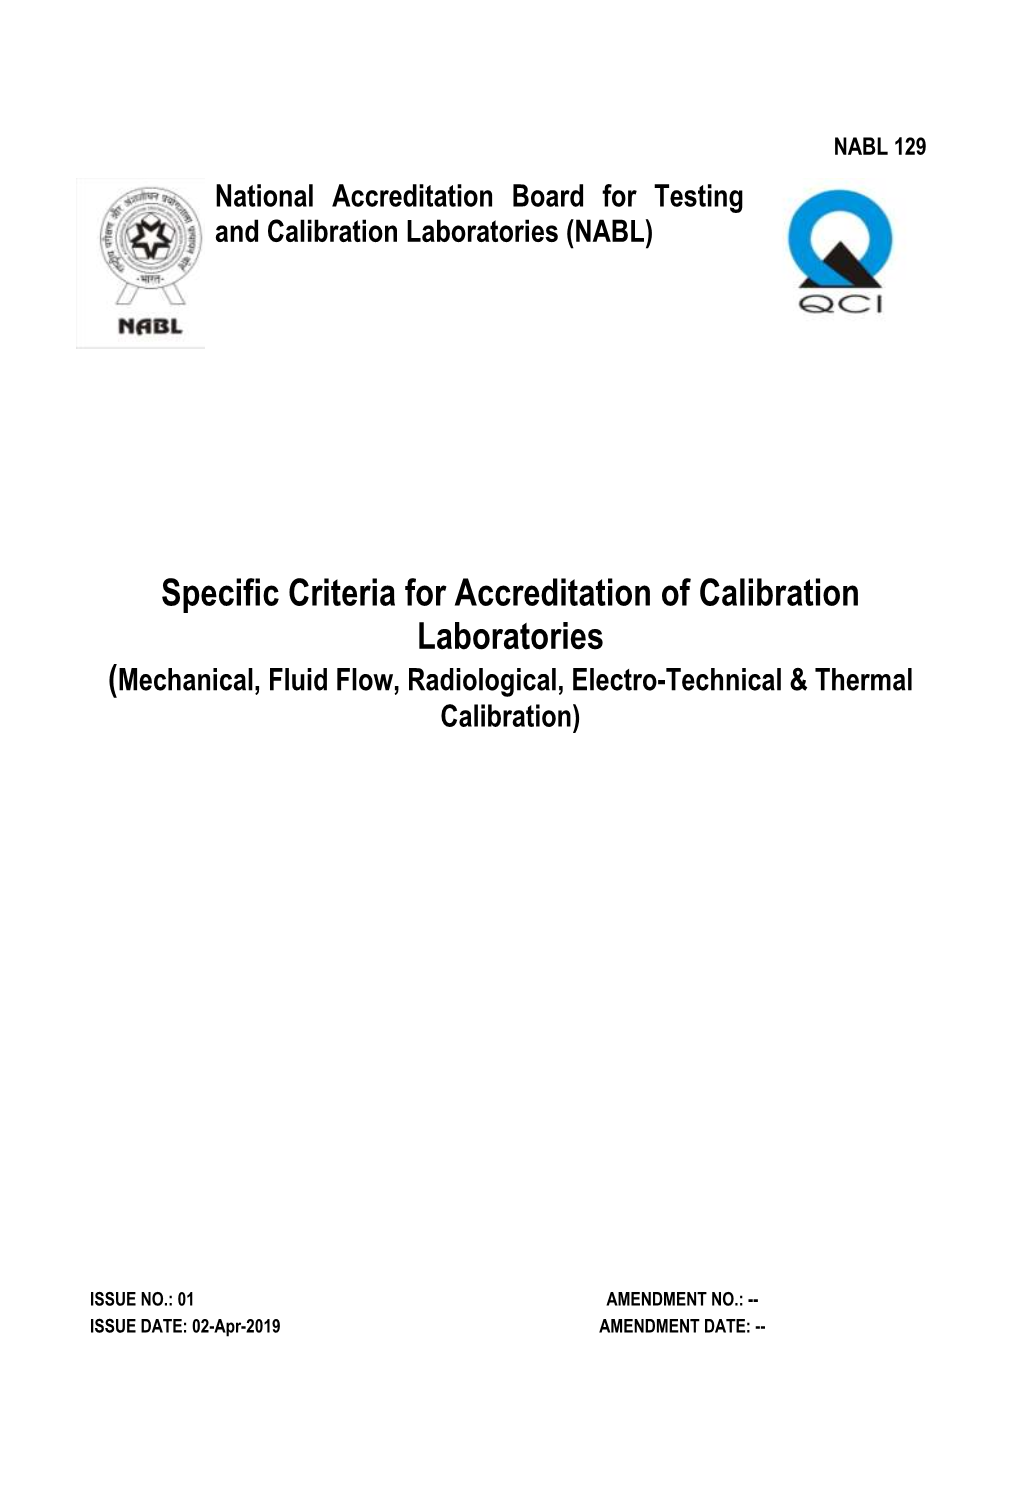 Specific Criteria for Accreditation of Calibration Laboratories (Mechanical, Fluid Flow, Radiological, Electro-Technical & Thermal Calibration)